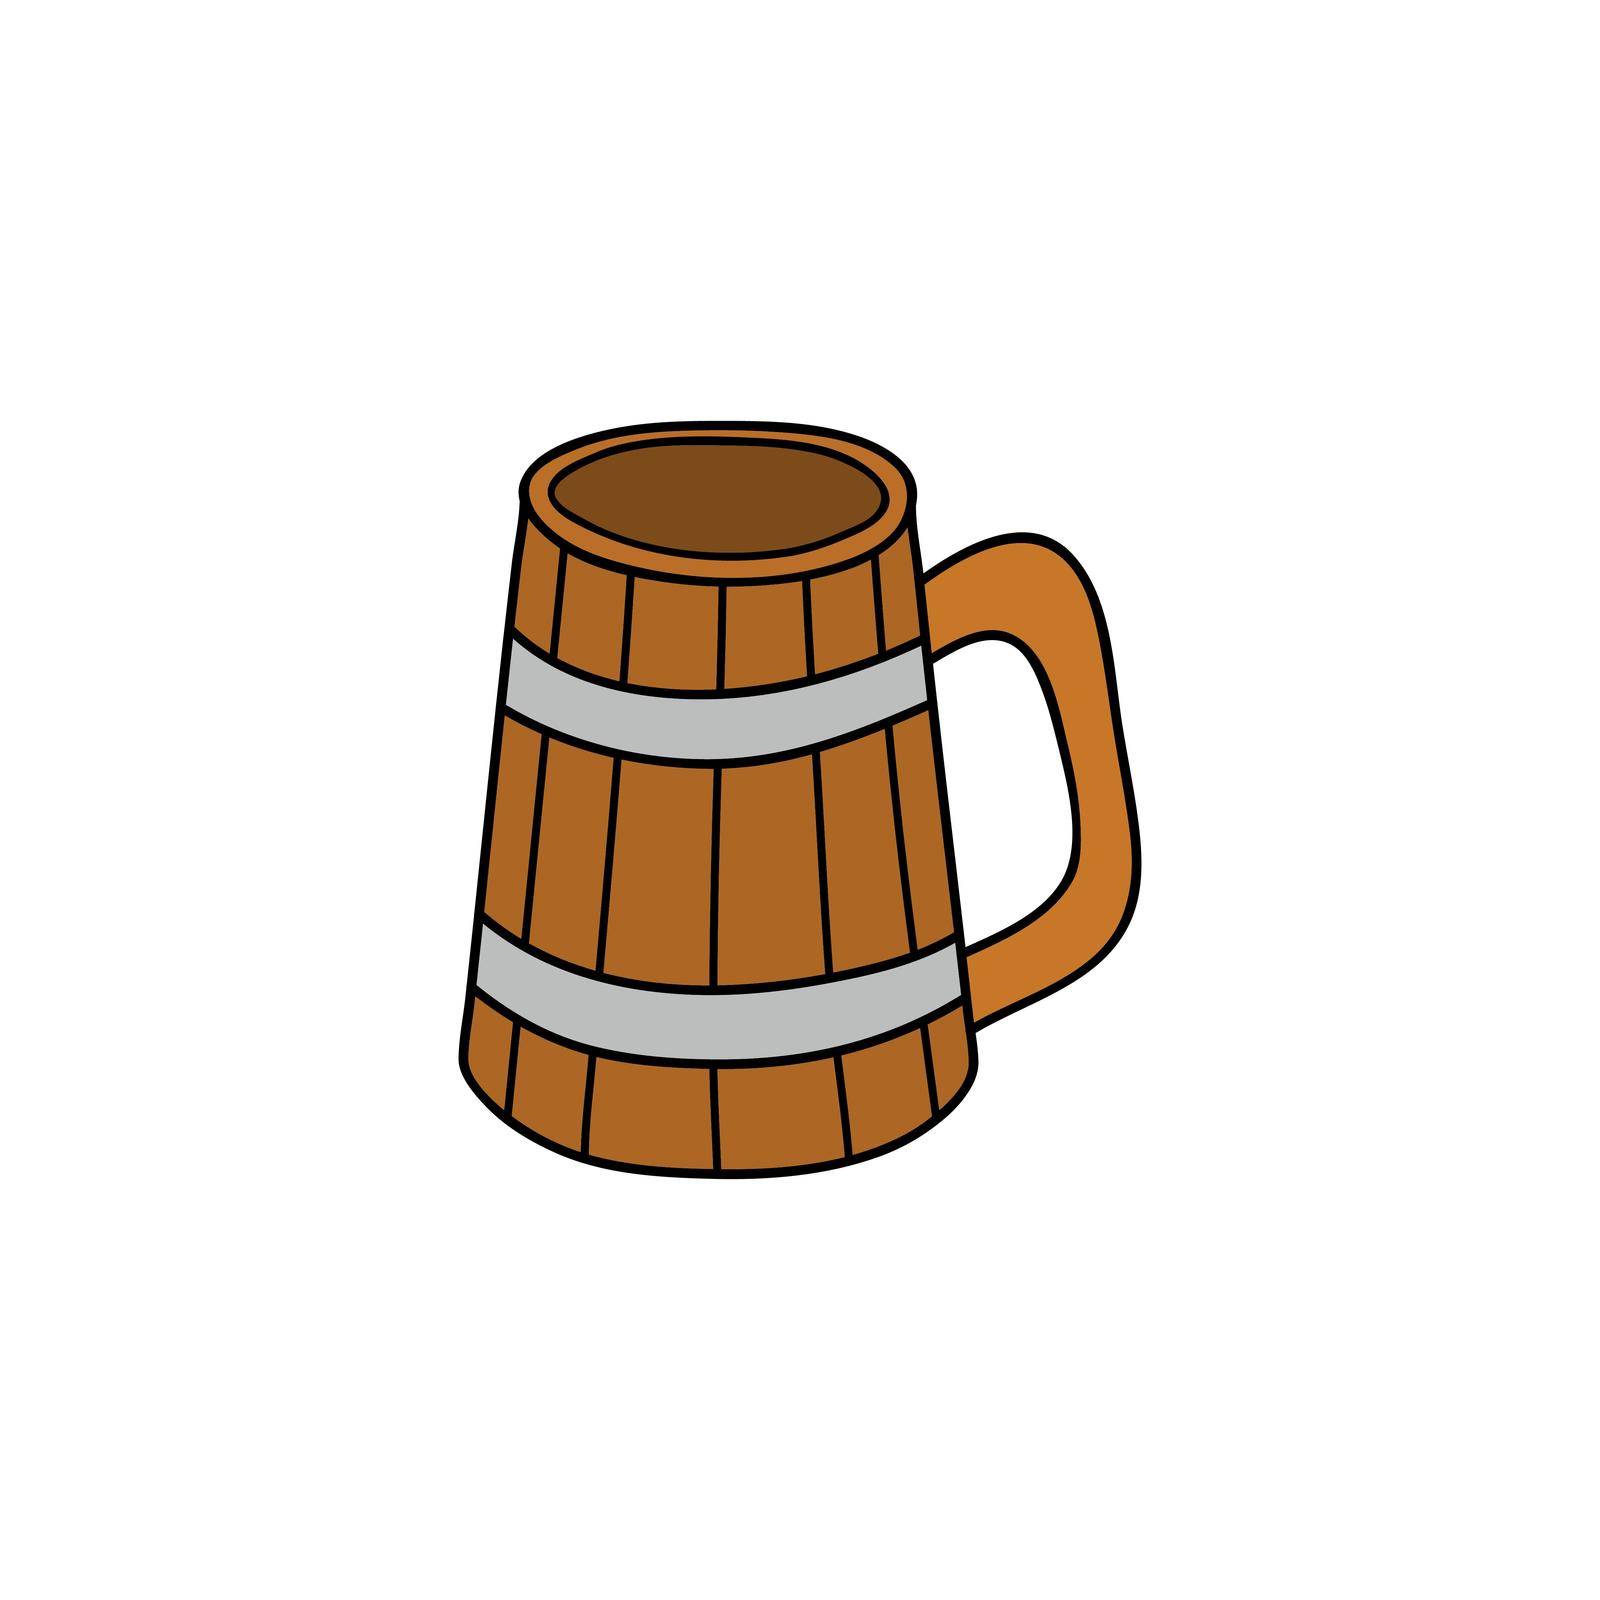 Hand drawn colored wooden mug for beer isolated on white background.